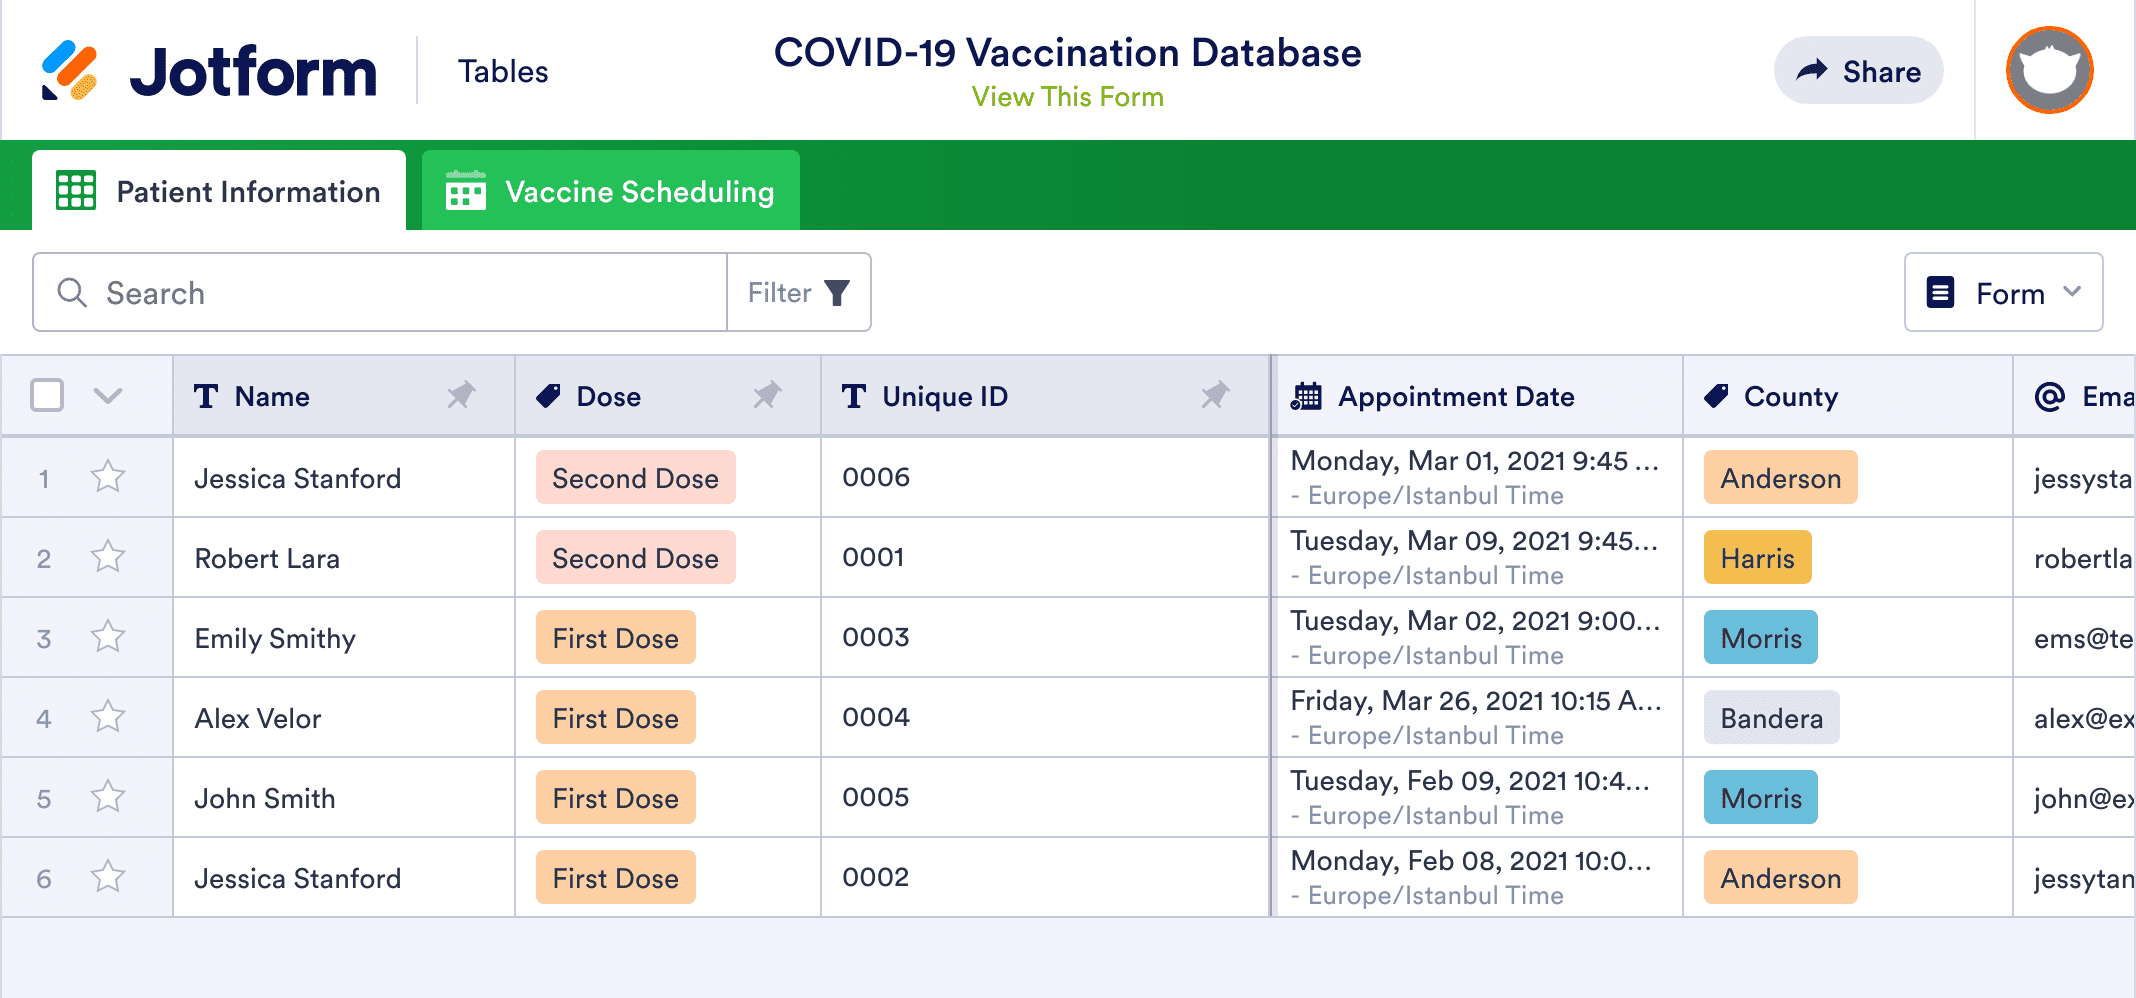 COVID-19 Vaccination Database